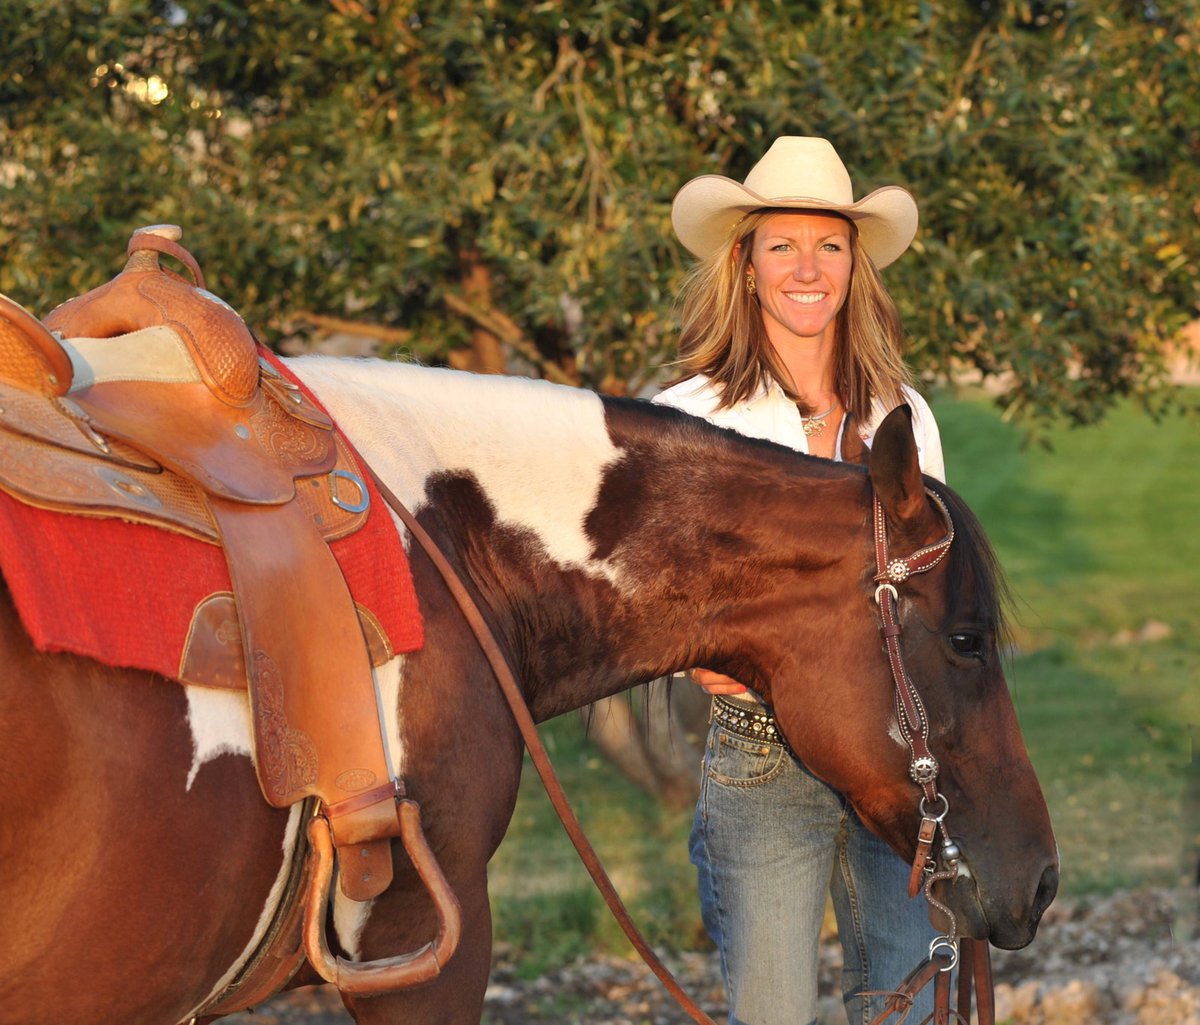 Under the guidance of a highly experienced equine facilitated learning coach and with the assistance of the horse as a teacher, the Horse Experience session can become a compelling metaphor representing the participant’s life situations. #Utah #HorseExperience #Kamas